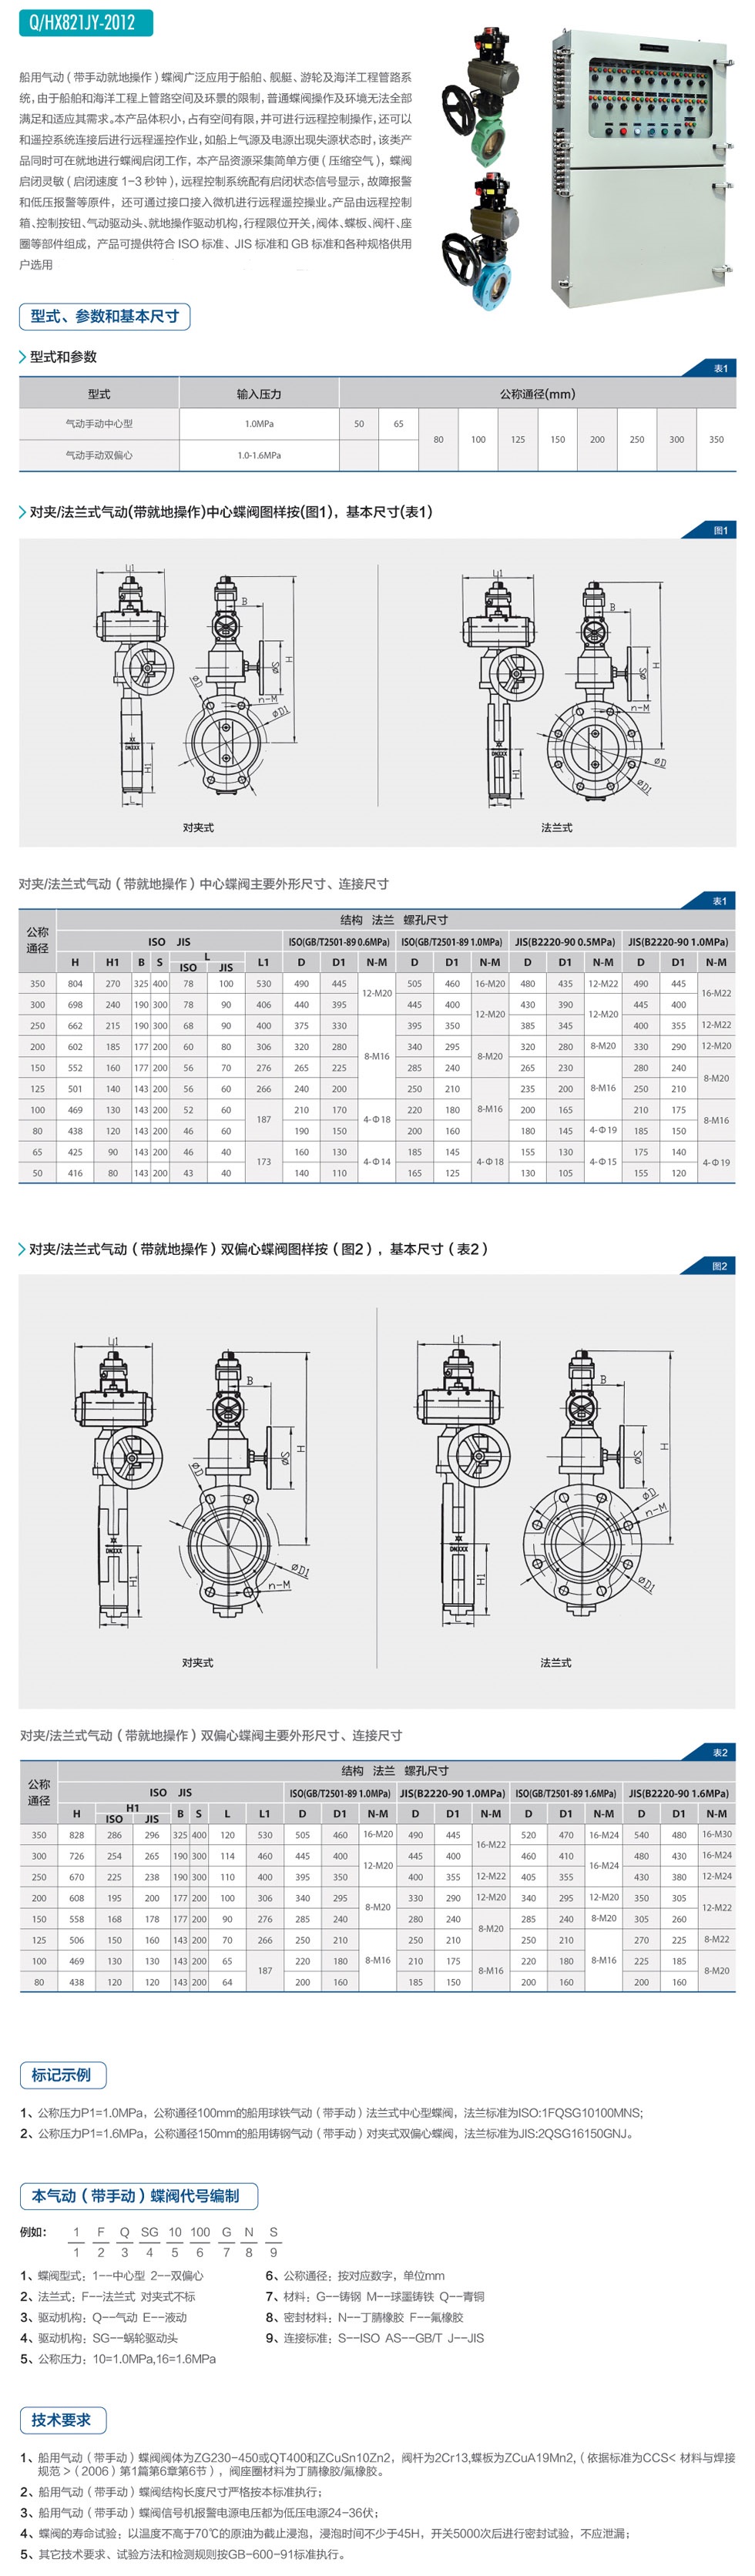 Marine pneumatic with manual operation butterfly valve (Figure 1)